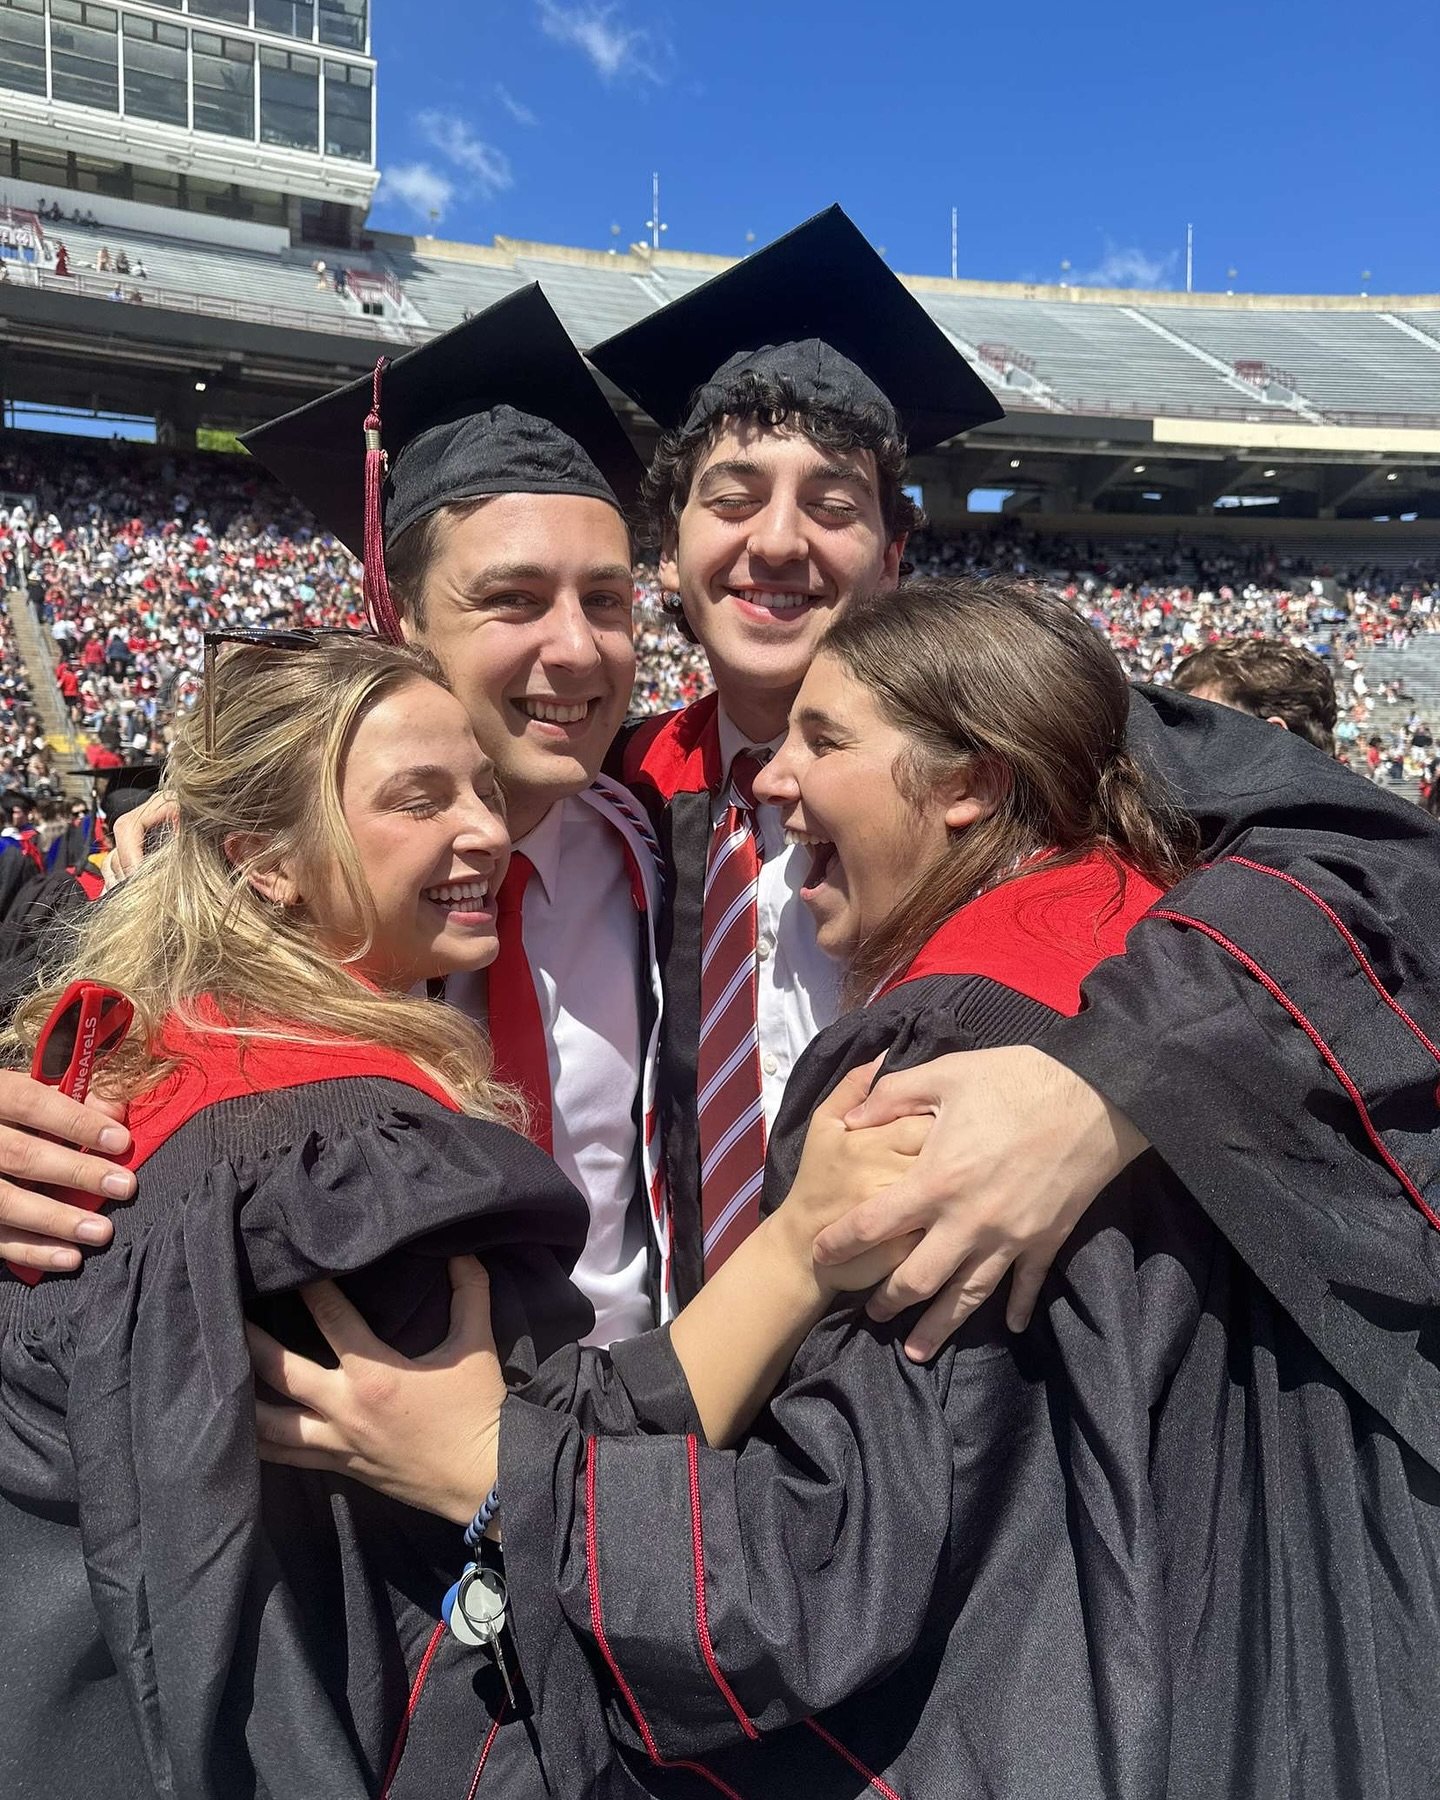 Three words for our seniors: WE LOVE YOU! &hearts;️ We wish our four newly graduates the best of luck on this next, big chapter! Congrats, grad! 🎓🧑&zwj;🎓👩&zwj;🎓 #graduation #uwmadison #senior #acappella #music